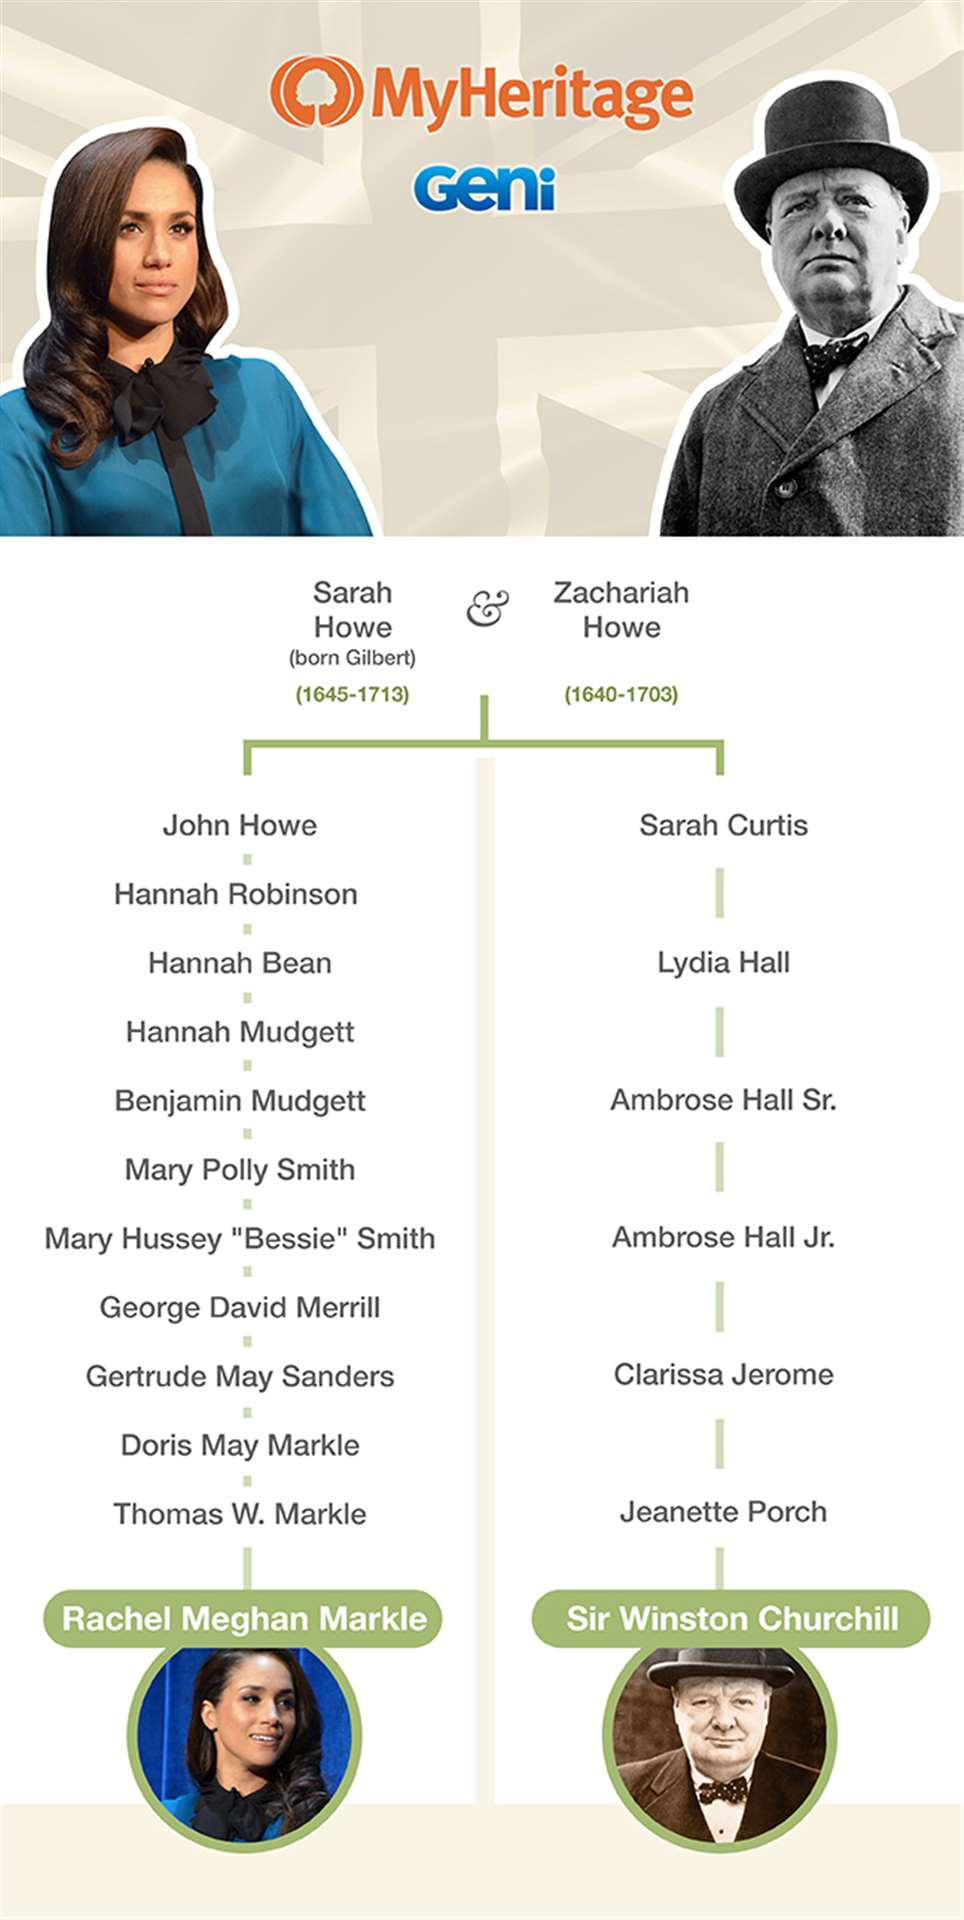 The family tree shows how Meghan Markle is related to Sir Winston Churchill. Graphic: MyHistory.com